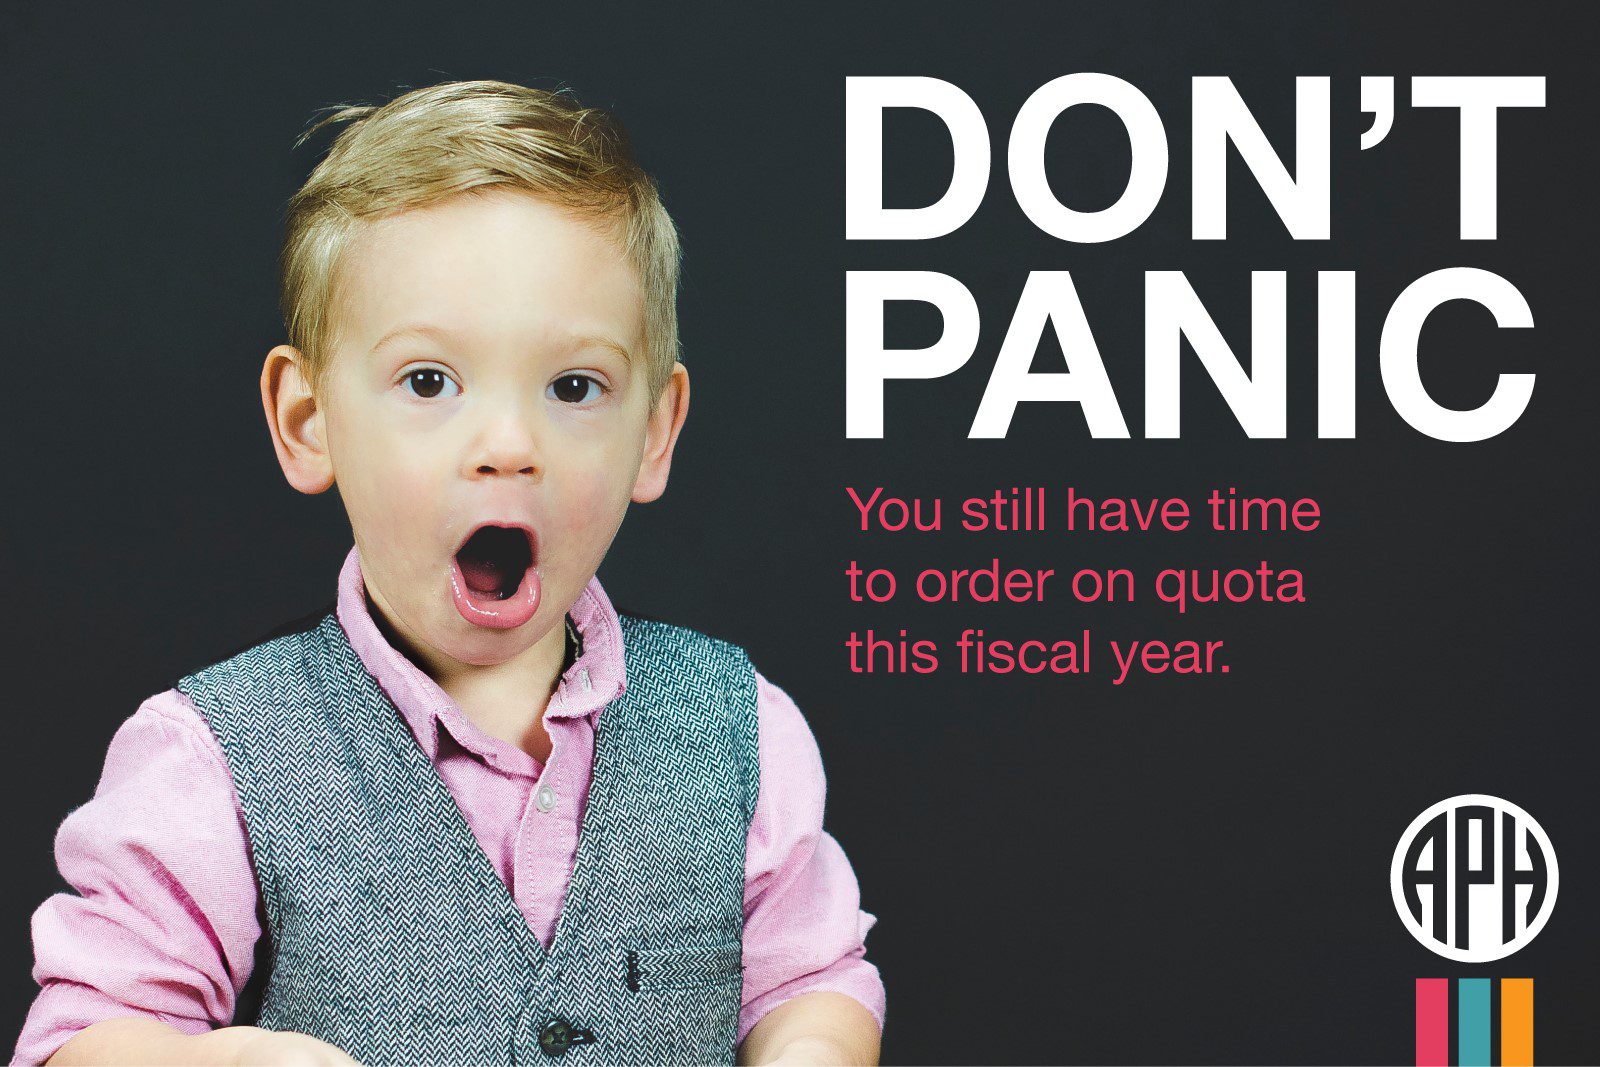 Little boy in a vest with his mouth open in shock. Text reads “Don’t panic! You still have time to order on quota this fiscal year.” APH logo.